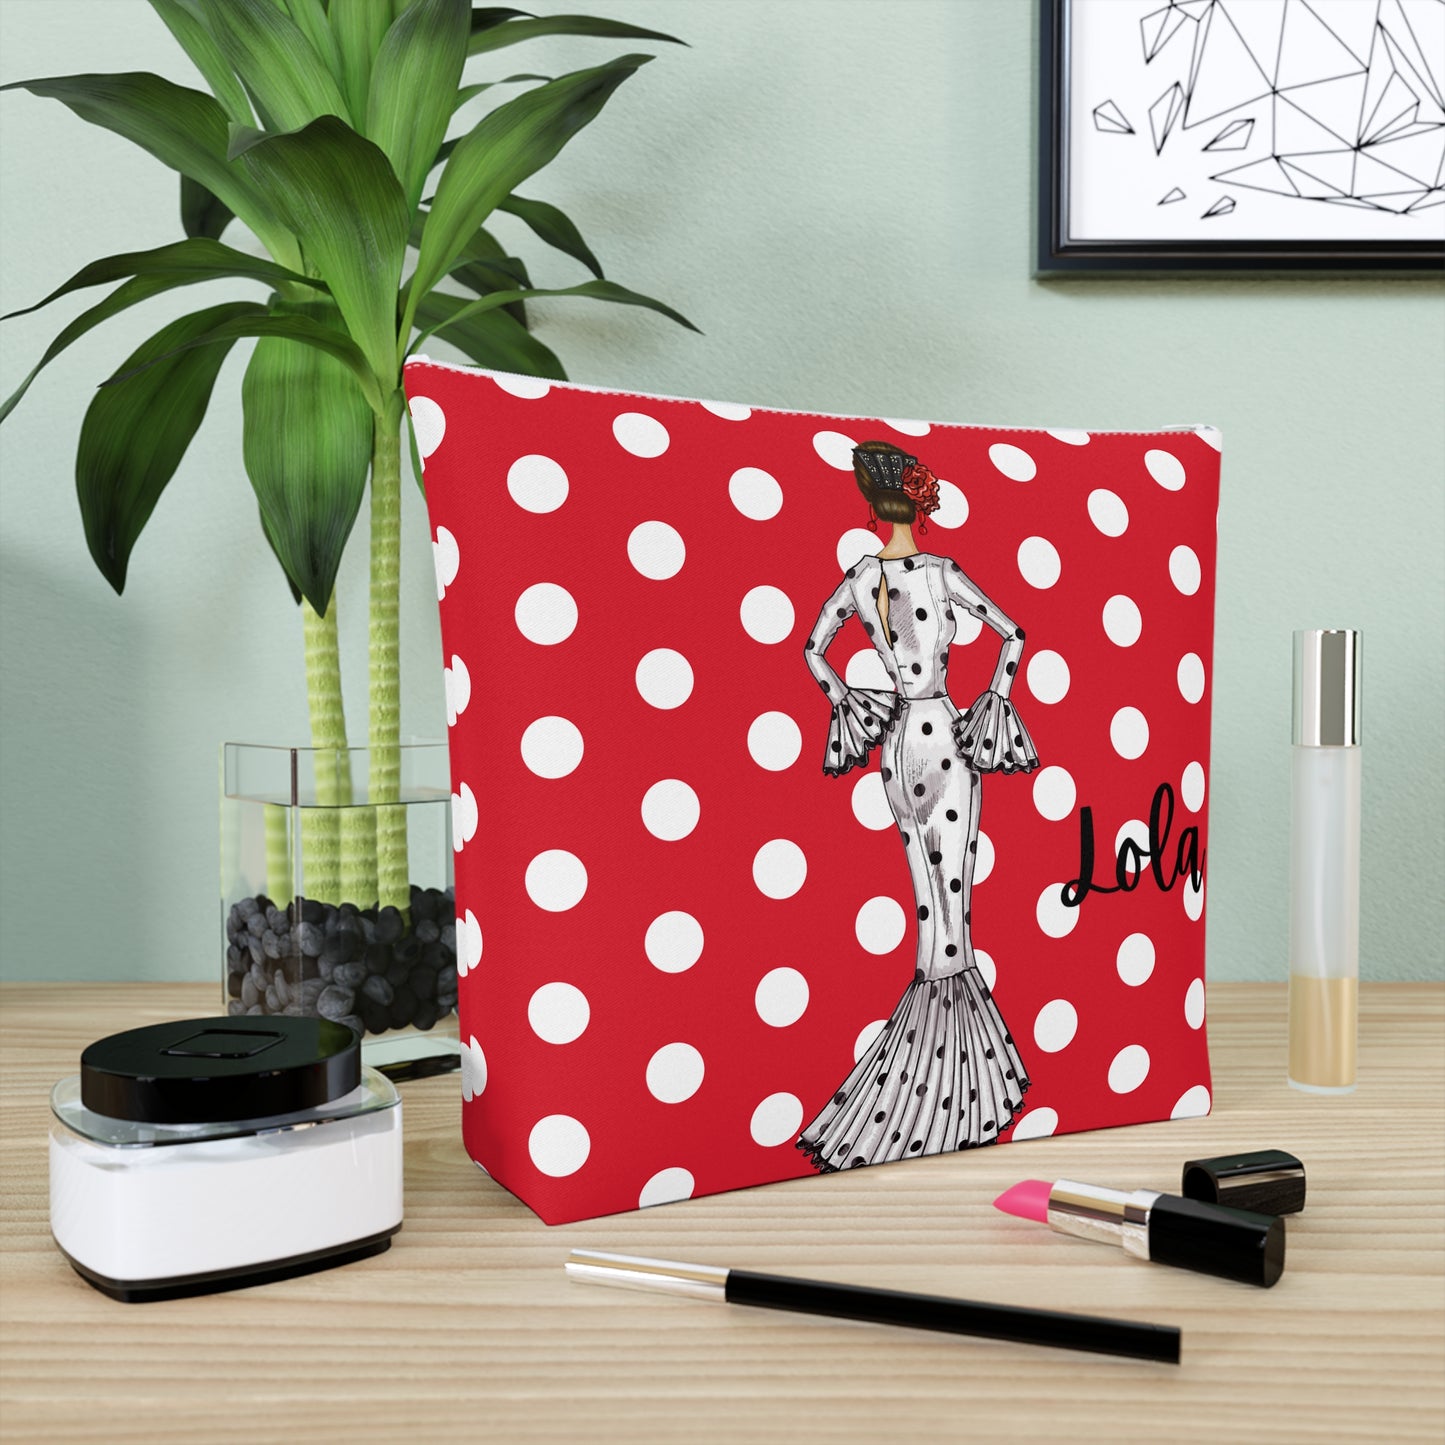 Customizable all purpose cotton bag, red background with white polka dots and our flamenco dancer María in a white dress.